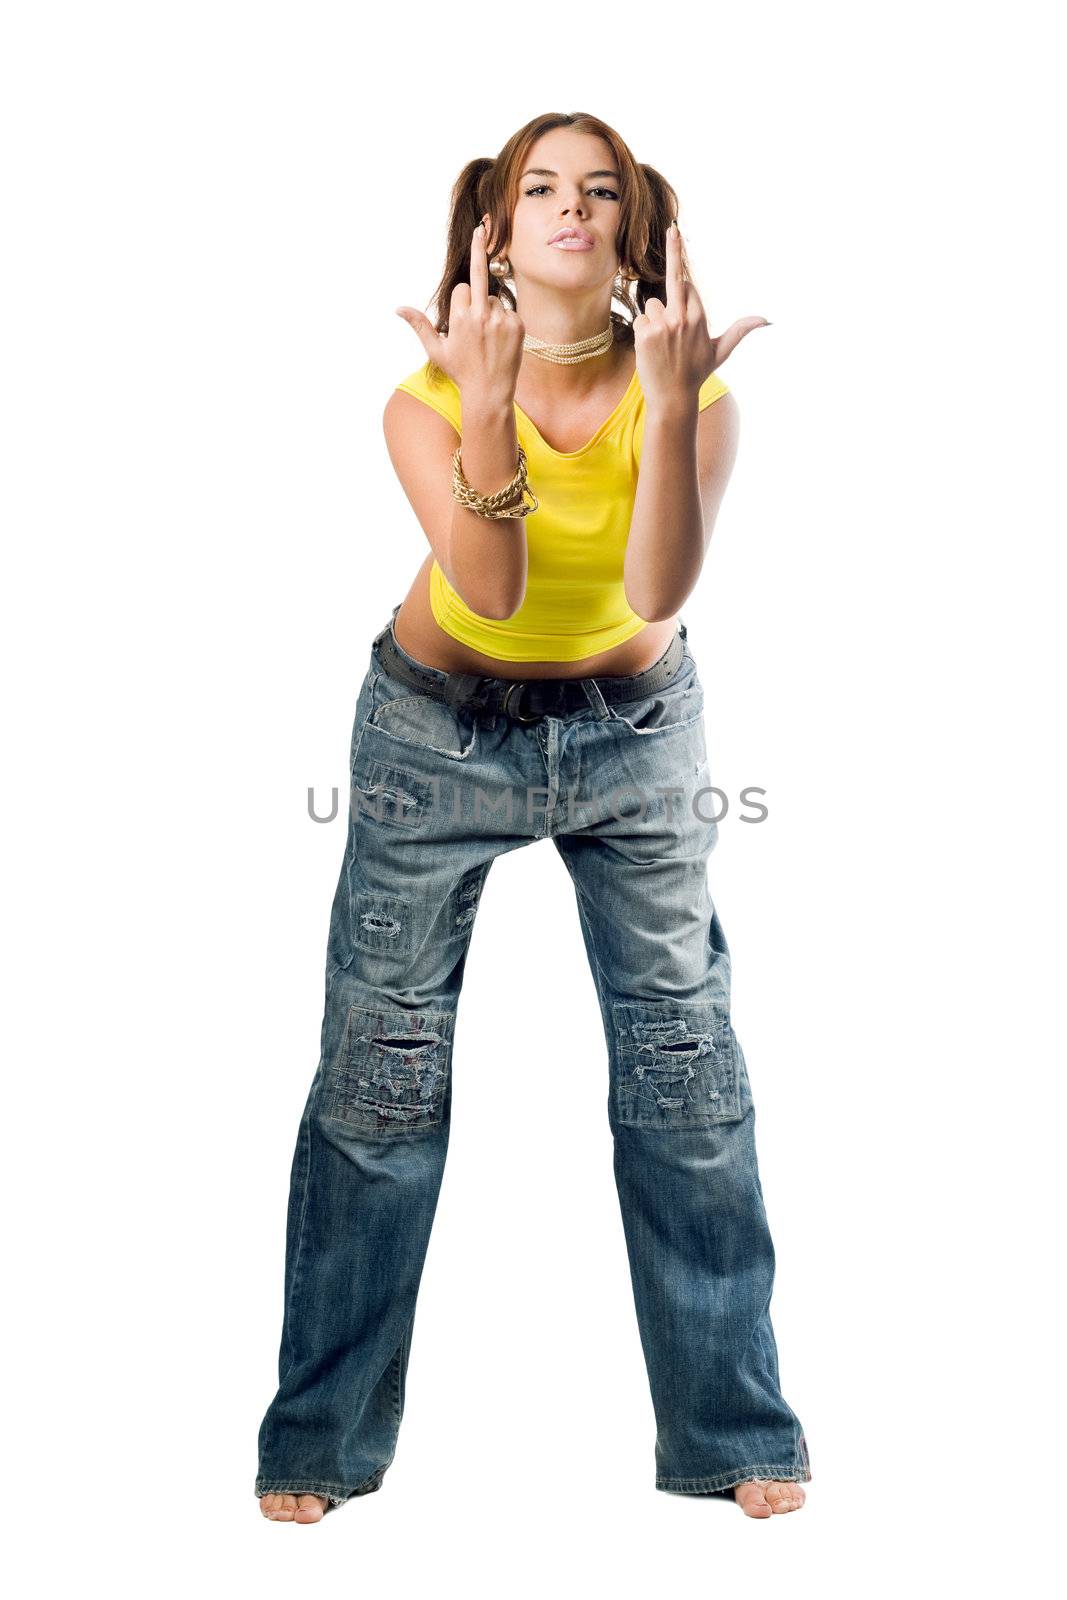 Naughty girl in wide jeans gesturing . Isolated on white